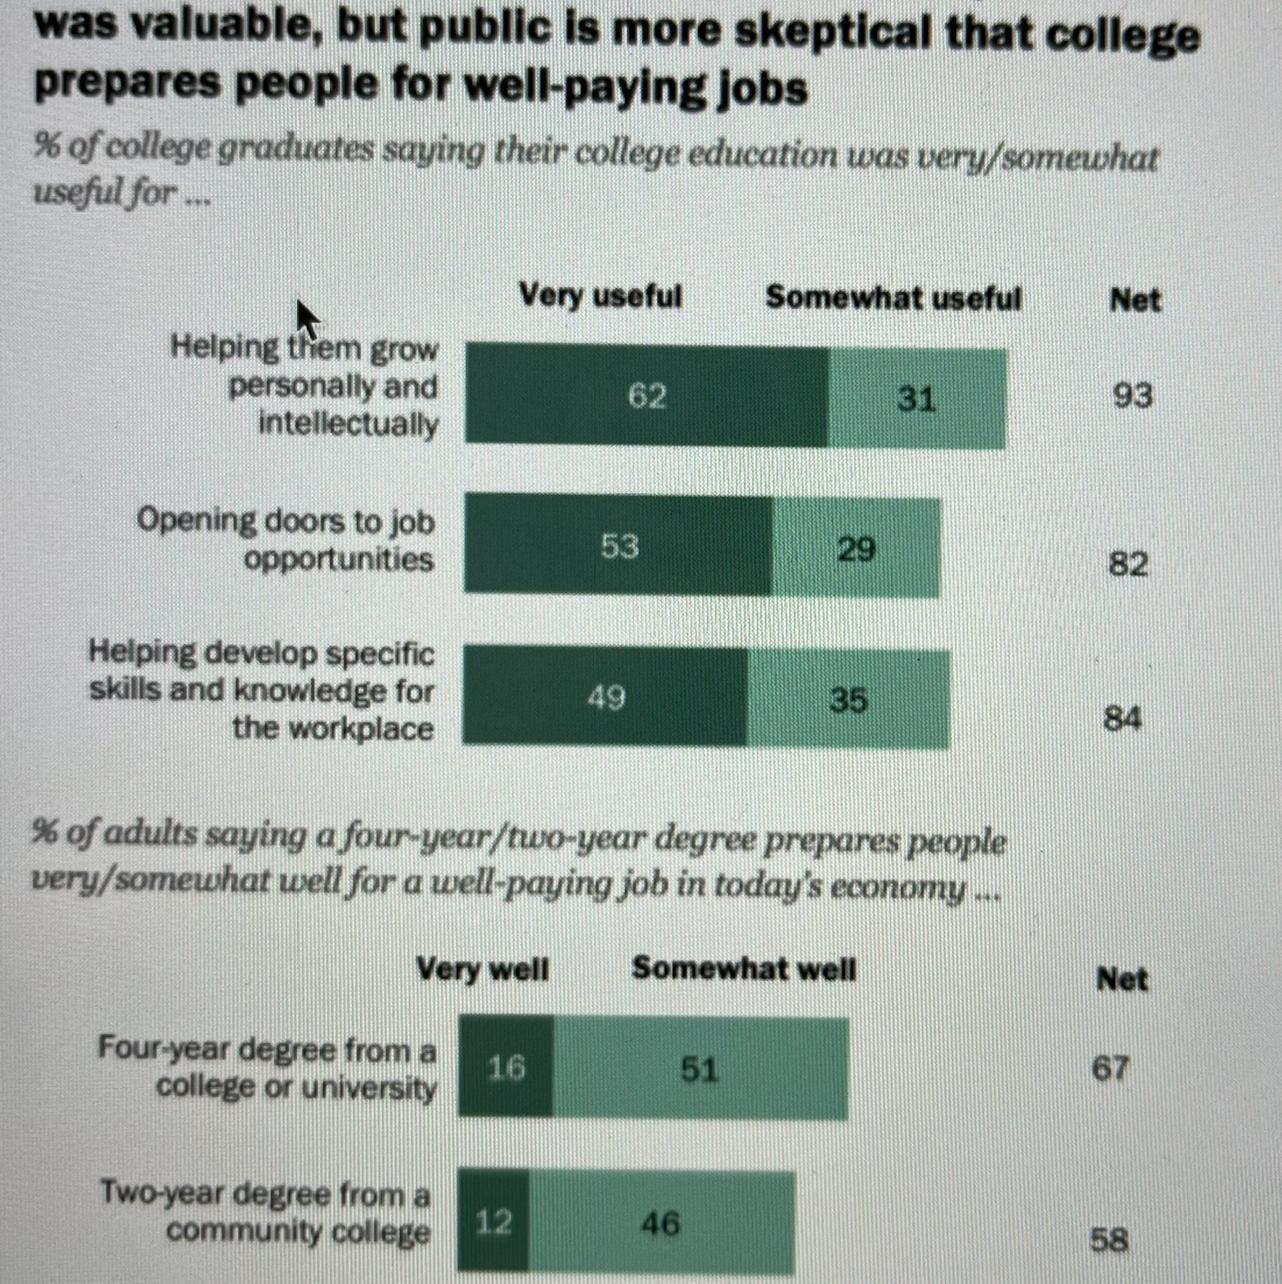 What Percentage Of College Graduates Believe Their Education Was Useful For Helping Them Grow Personally